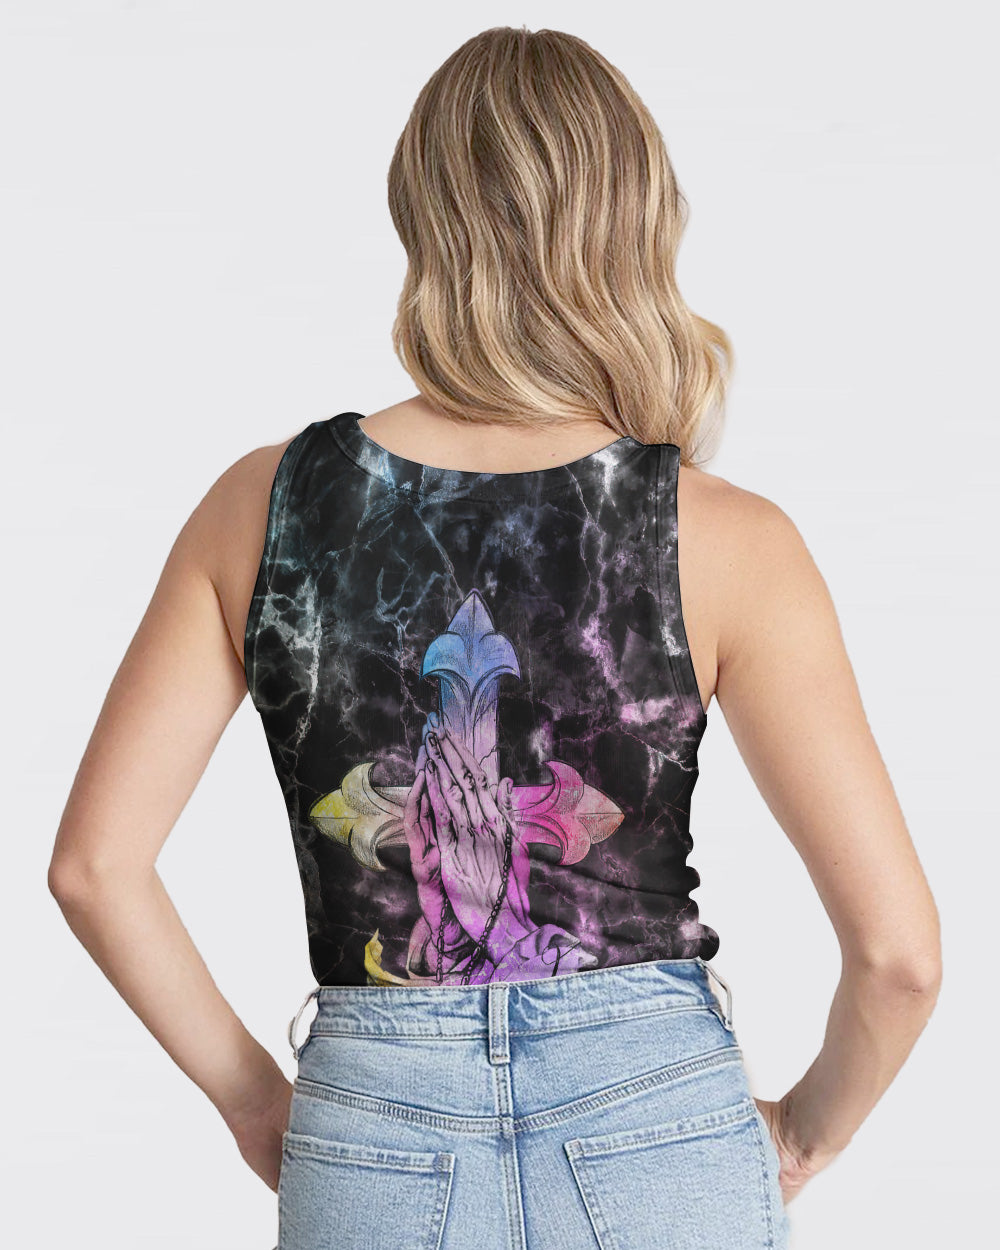 Blessed Cross Hand Colorful Women's Christian Tanks